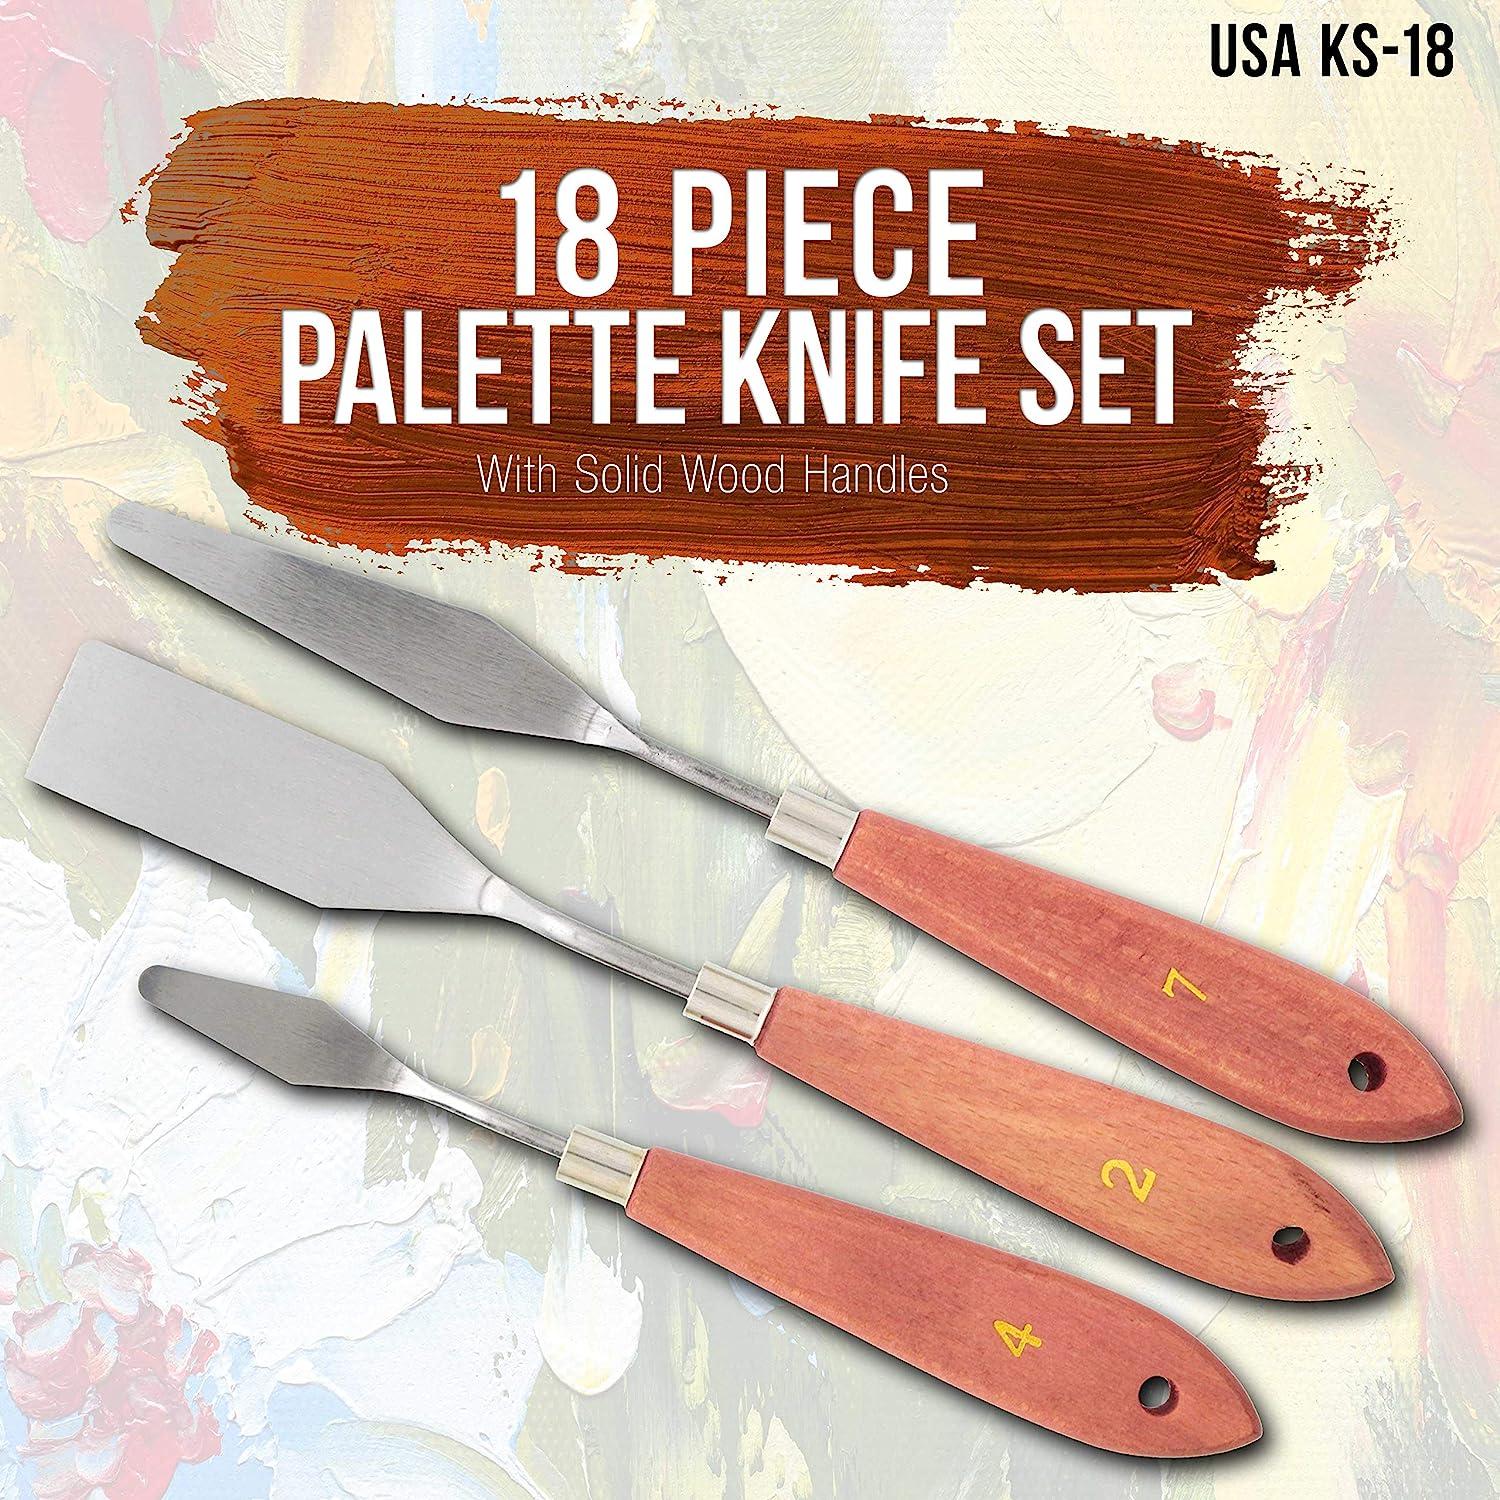 15 Pcs Painting Knife Set Stainless Steel Palette Knife for Acrylic Paint  Art Spatula Knife with Wooden Handle for Oil Painting Supplies